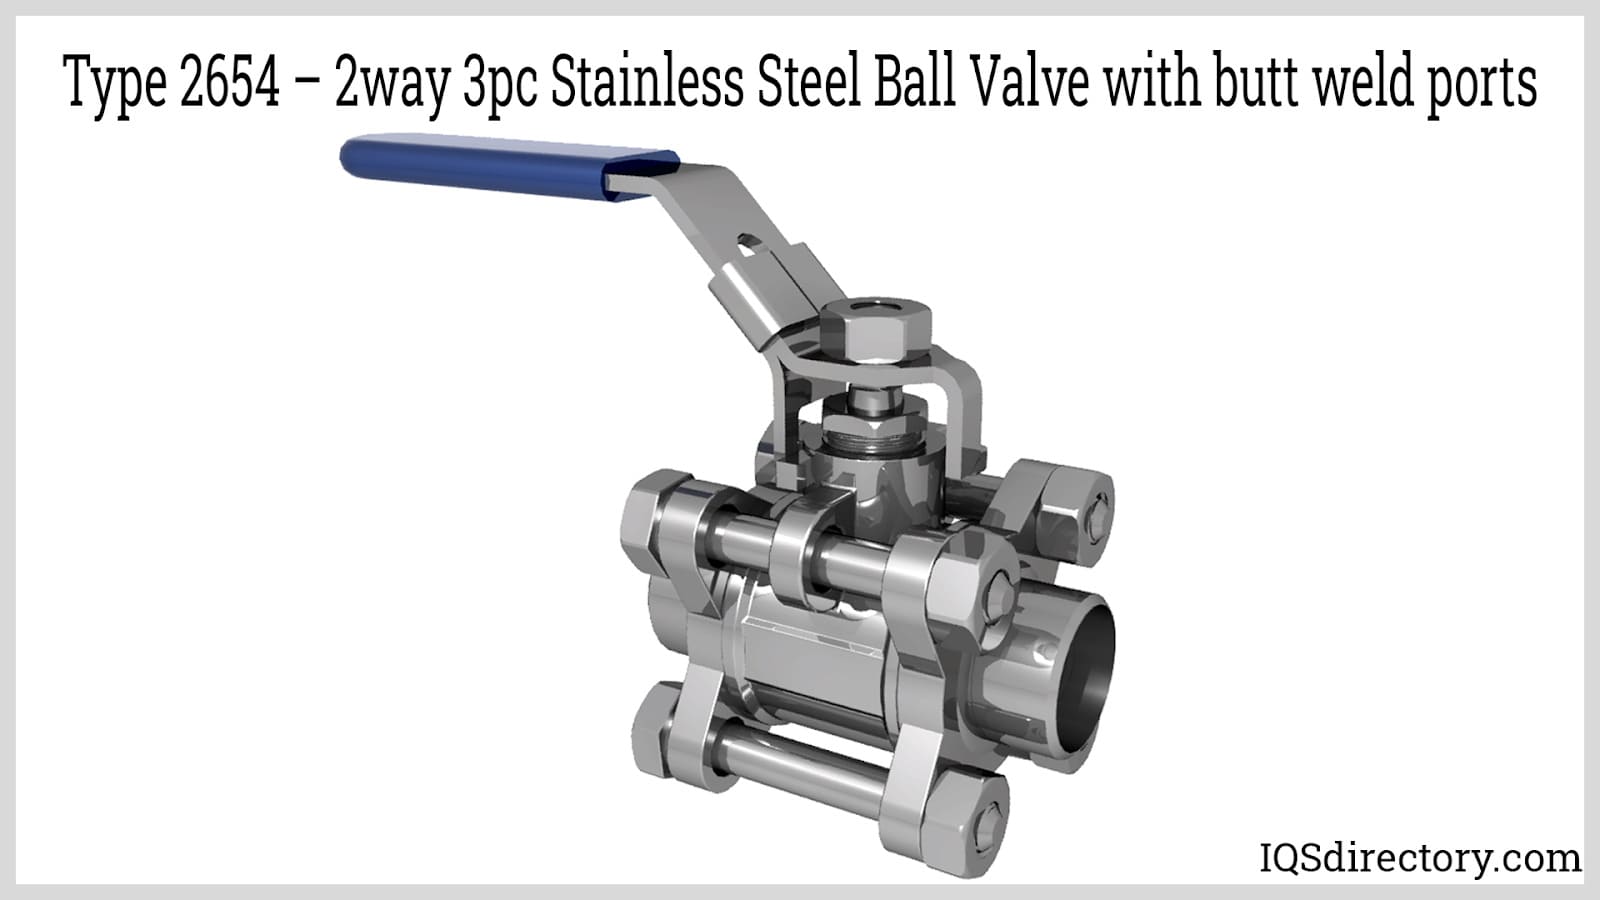 Type 2654 – 2way 3pc Stainless Steel Ball Valve with butt weld ports